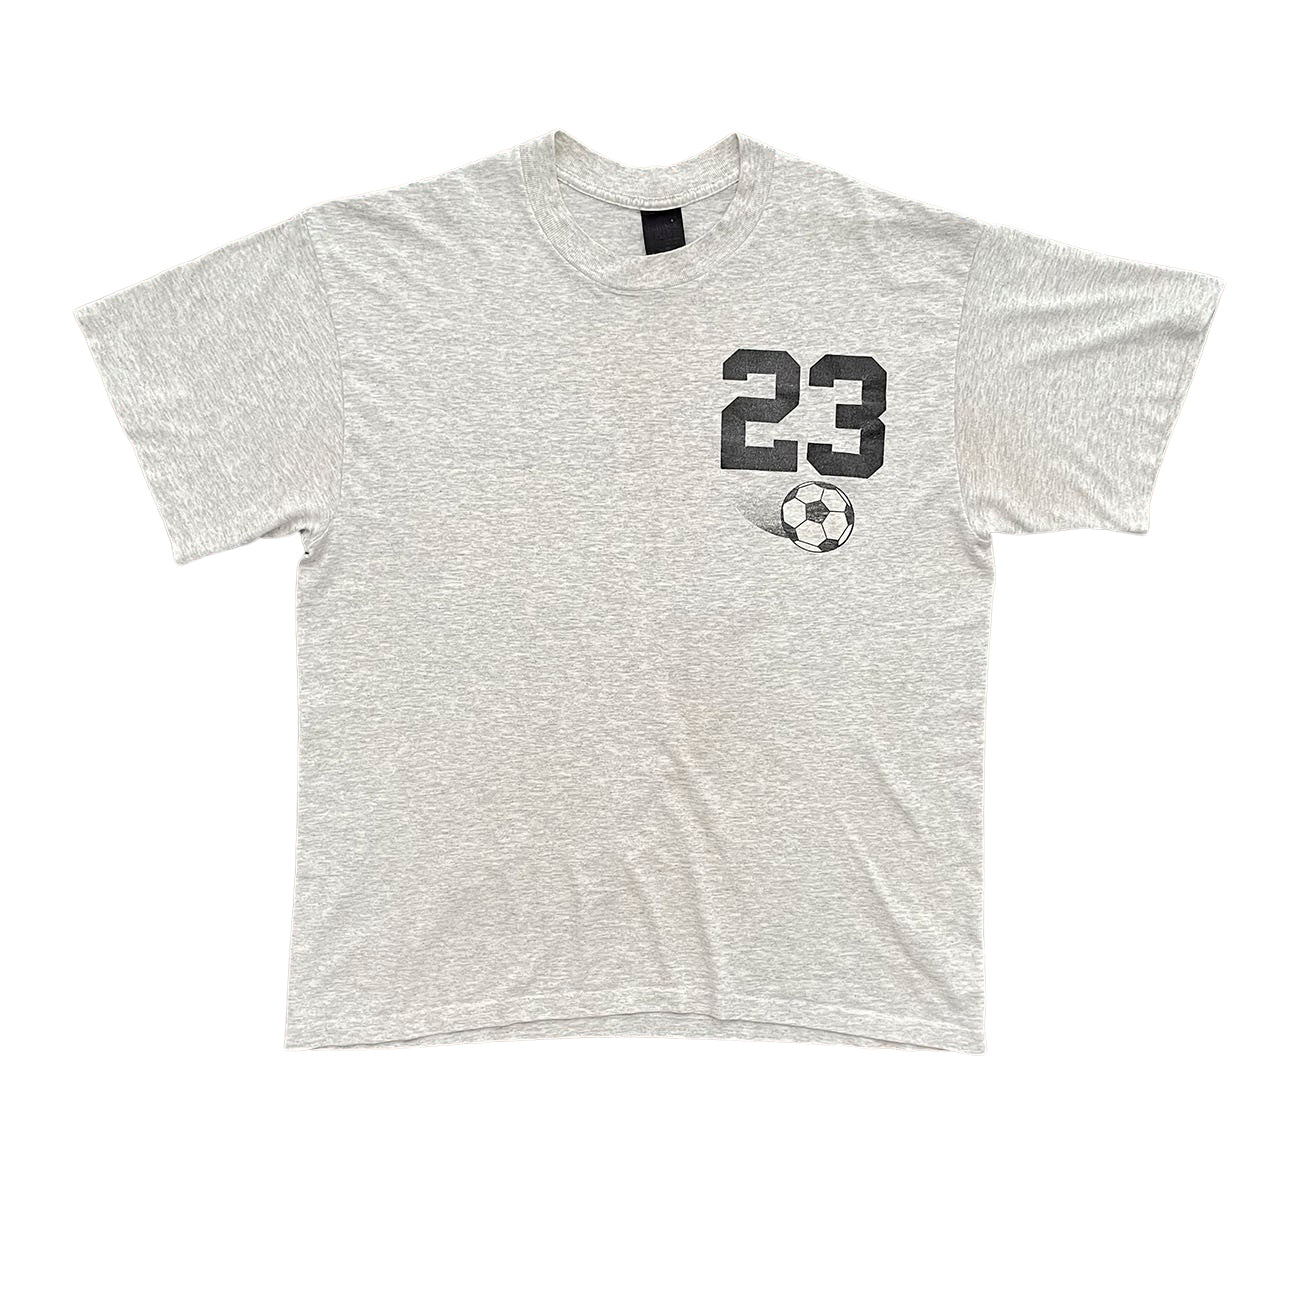 "Gimme The Ball" Graphic T-Shirt - XL